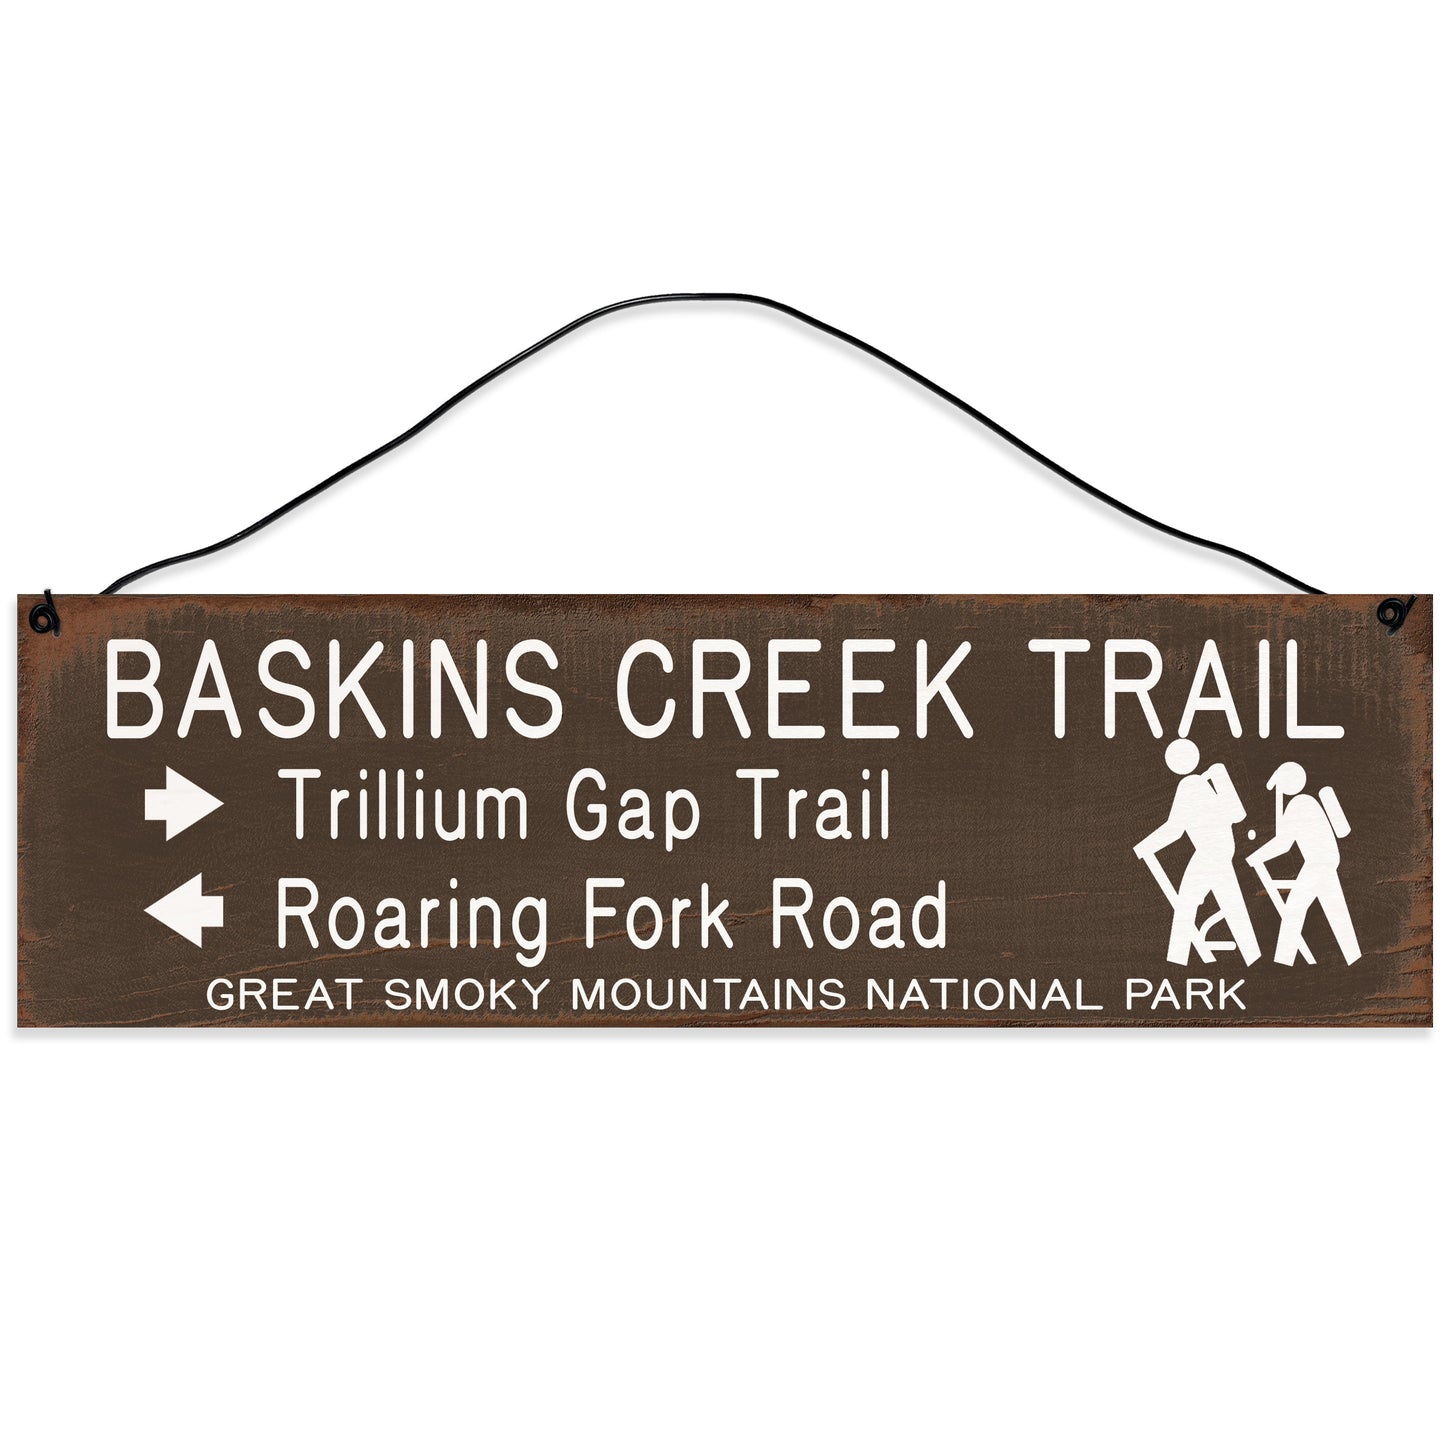 Sawyer's Mill - Baskins Creek Trail Marker Wood Sign for Home or Office. Measures 3x10 inches.